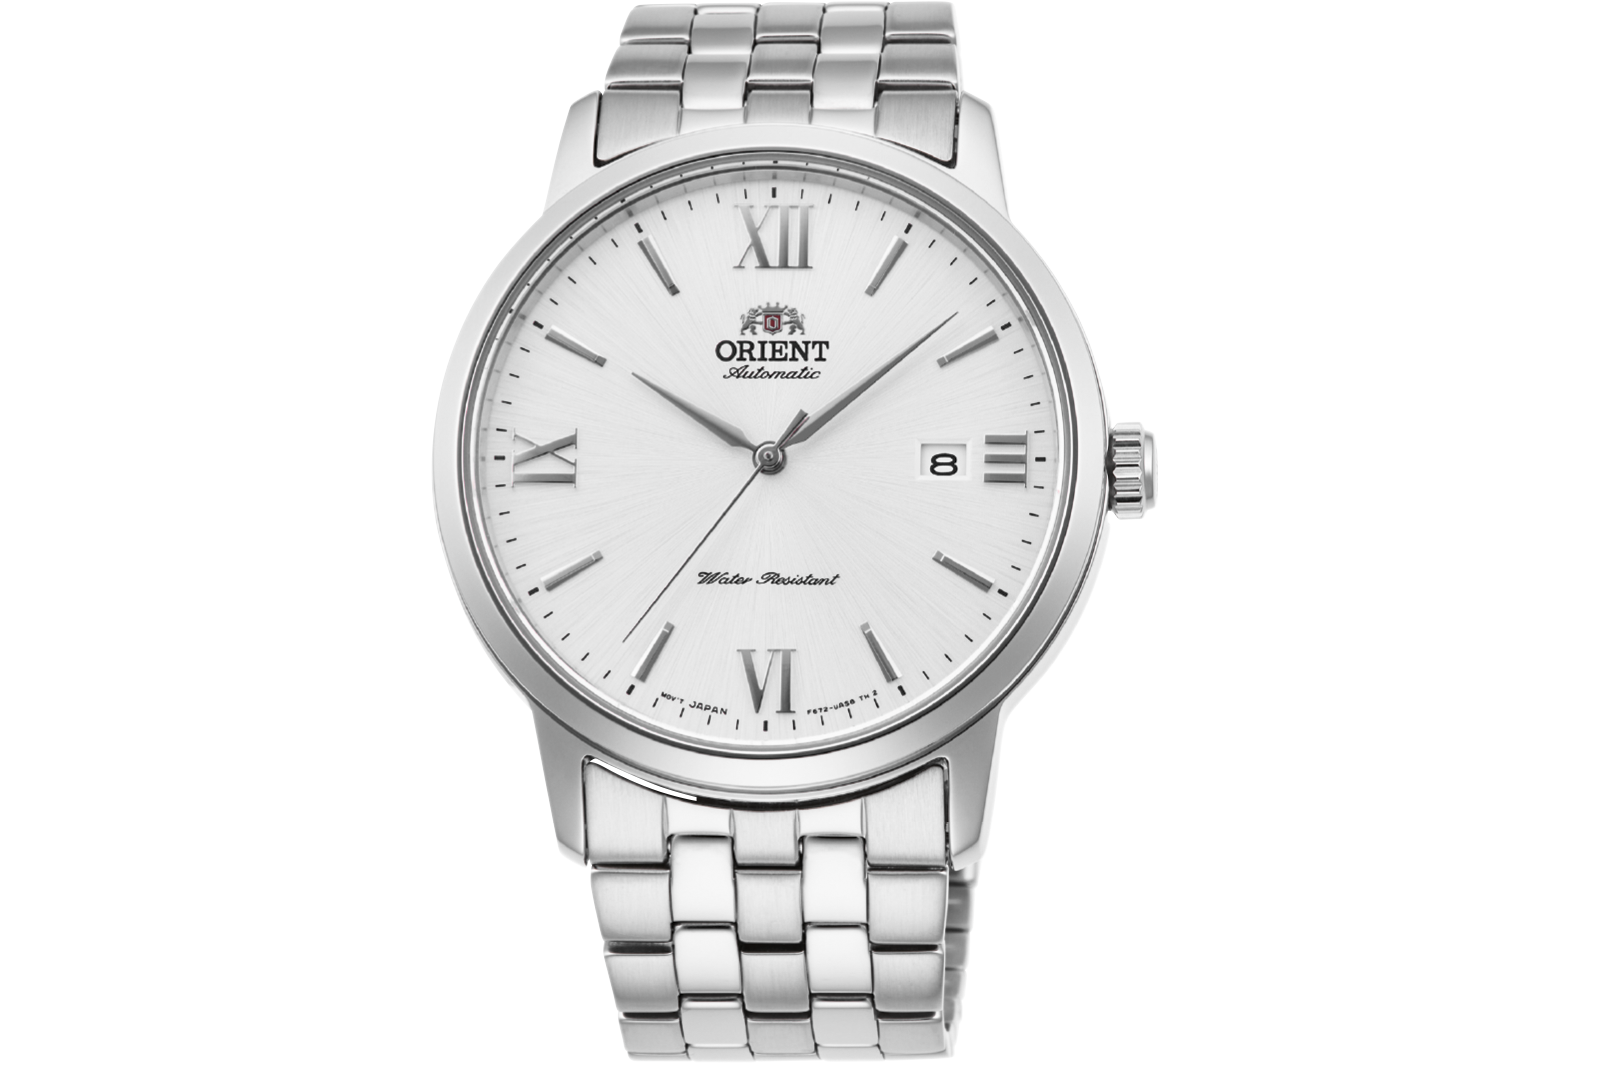 Orient watches RA-AC0F02S10B Watch Silver